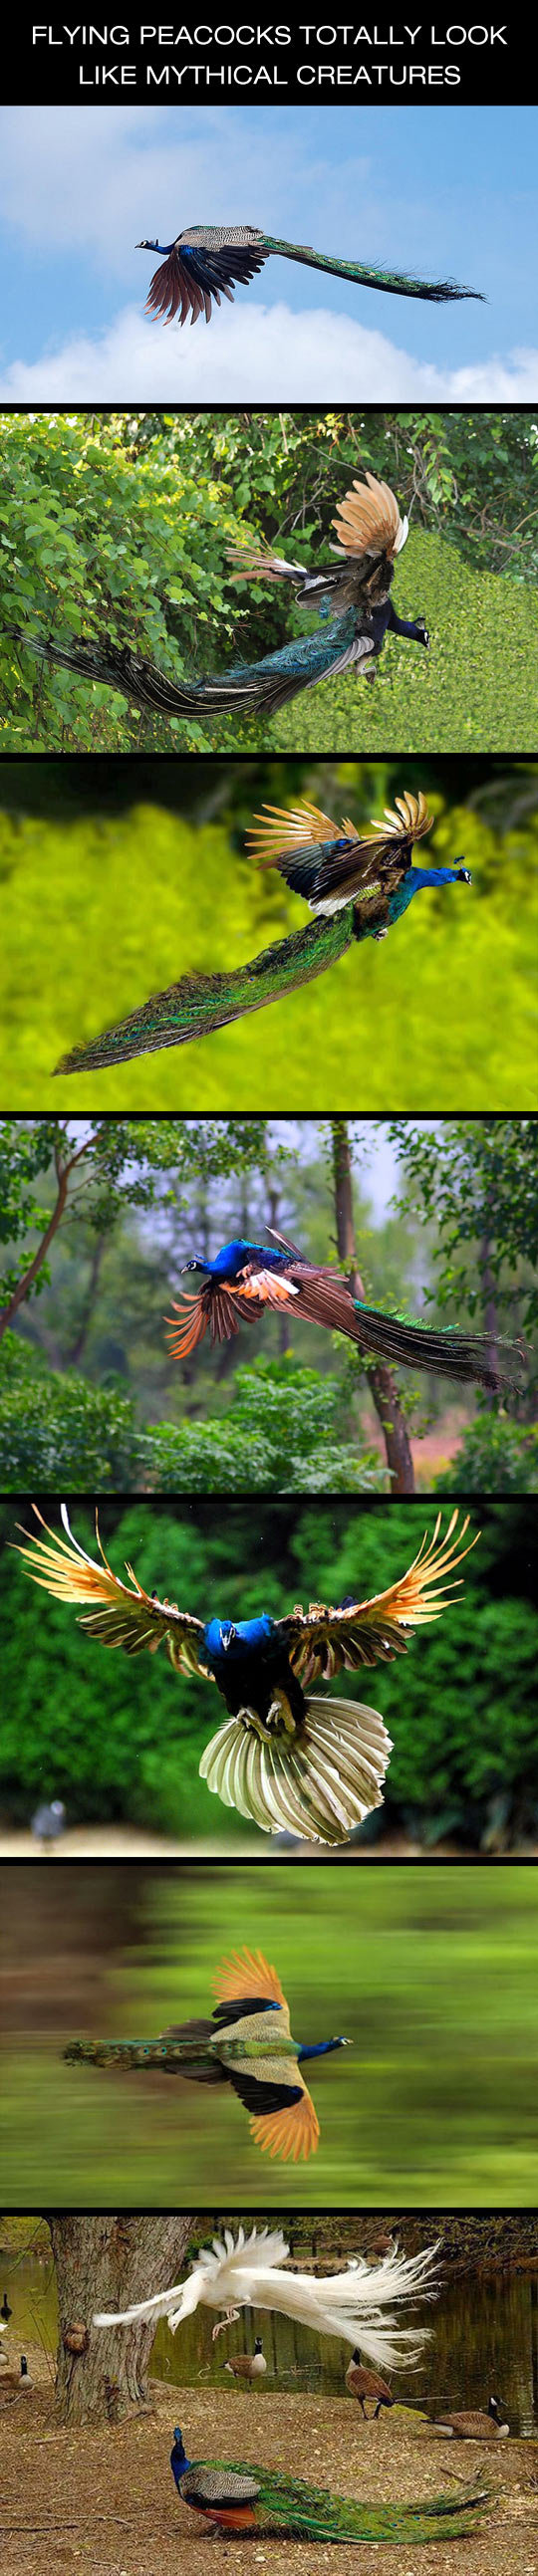 they fly?. . FLYING PEACOCKS TOTALLY LOOK LIKE CREATURES. I am gullible enough to believe some of them are phoenixes